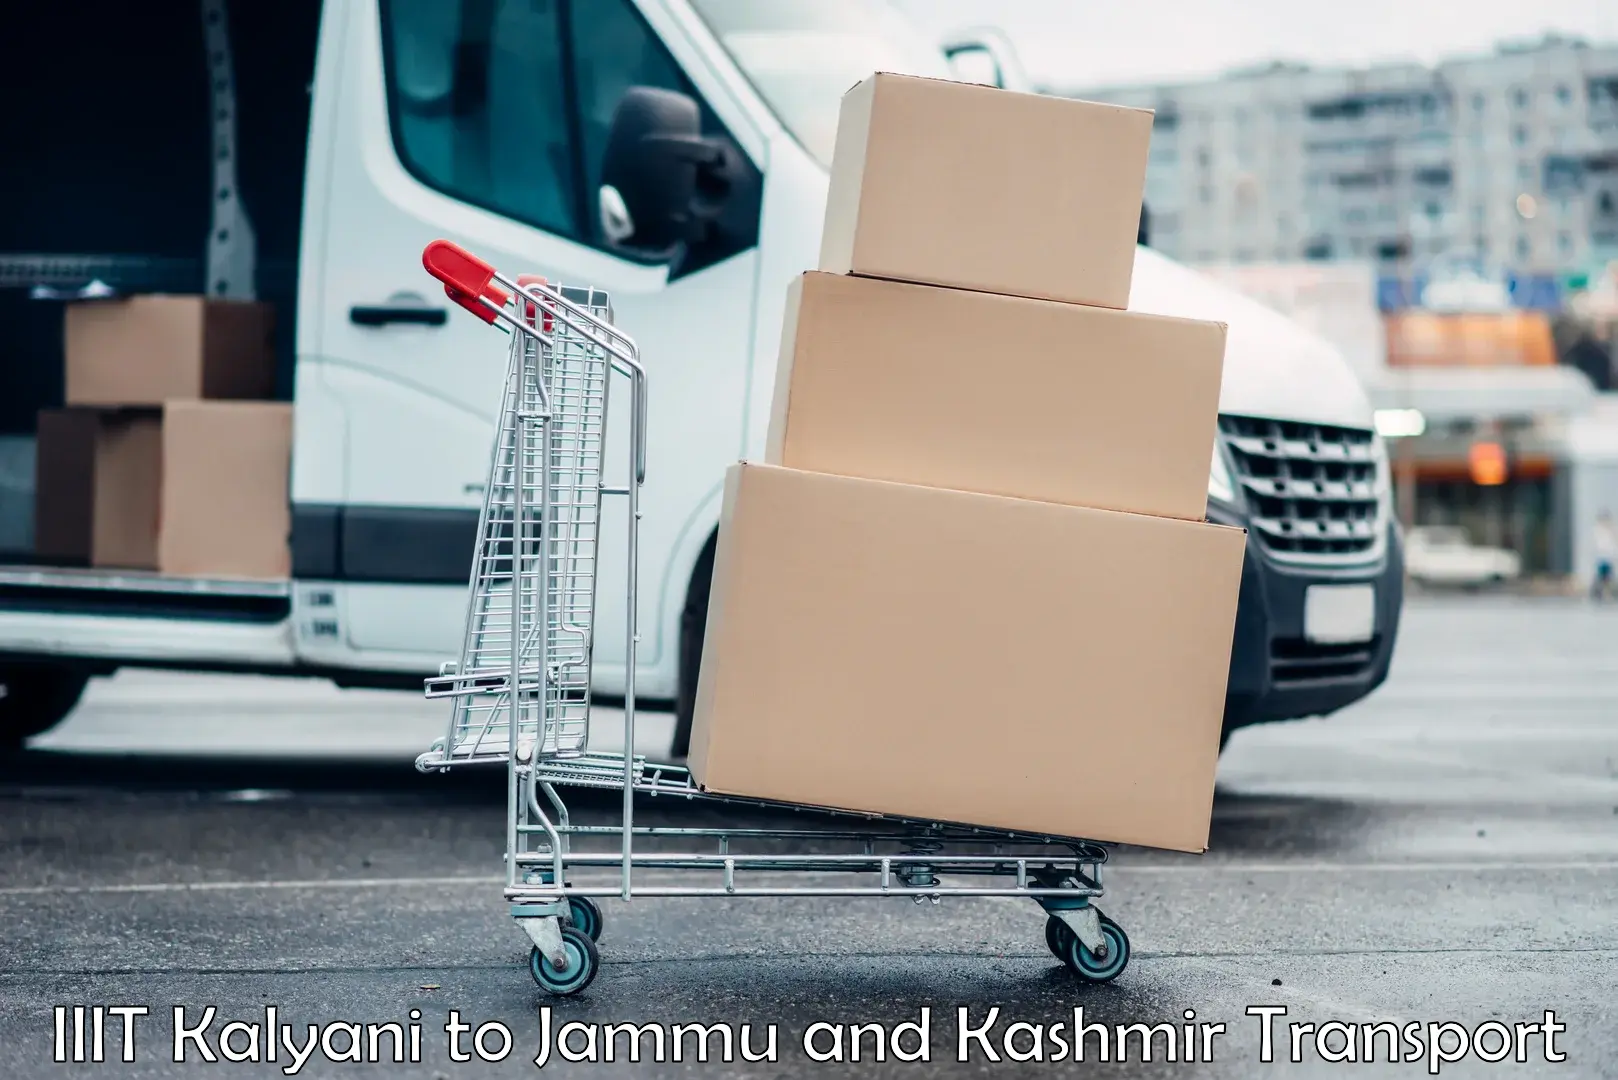 Container transport service IIIT Kalyani to Pulwama